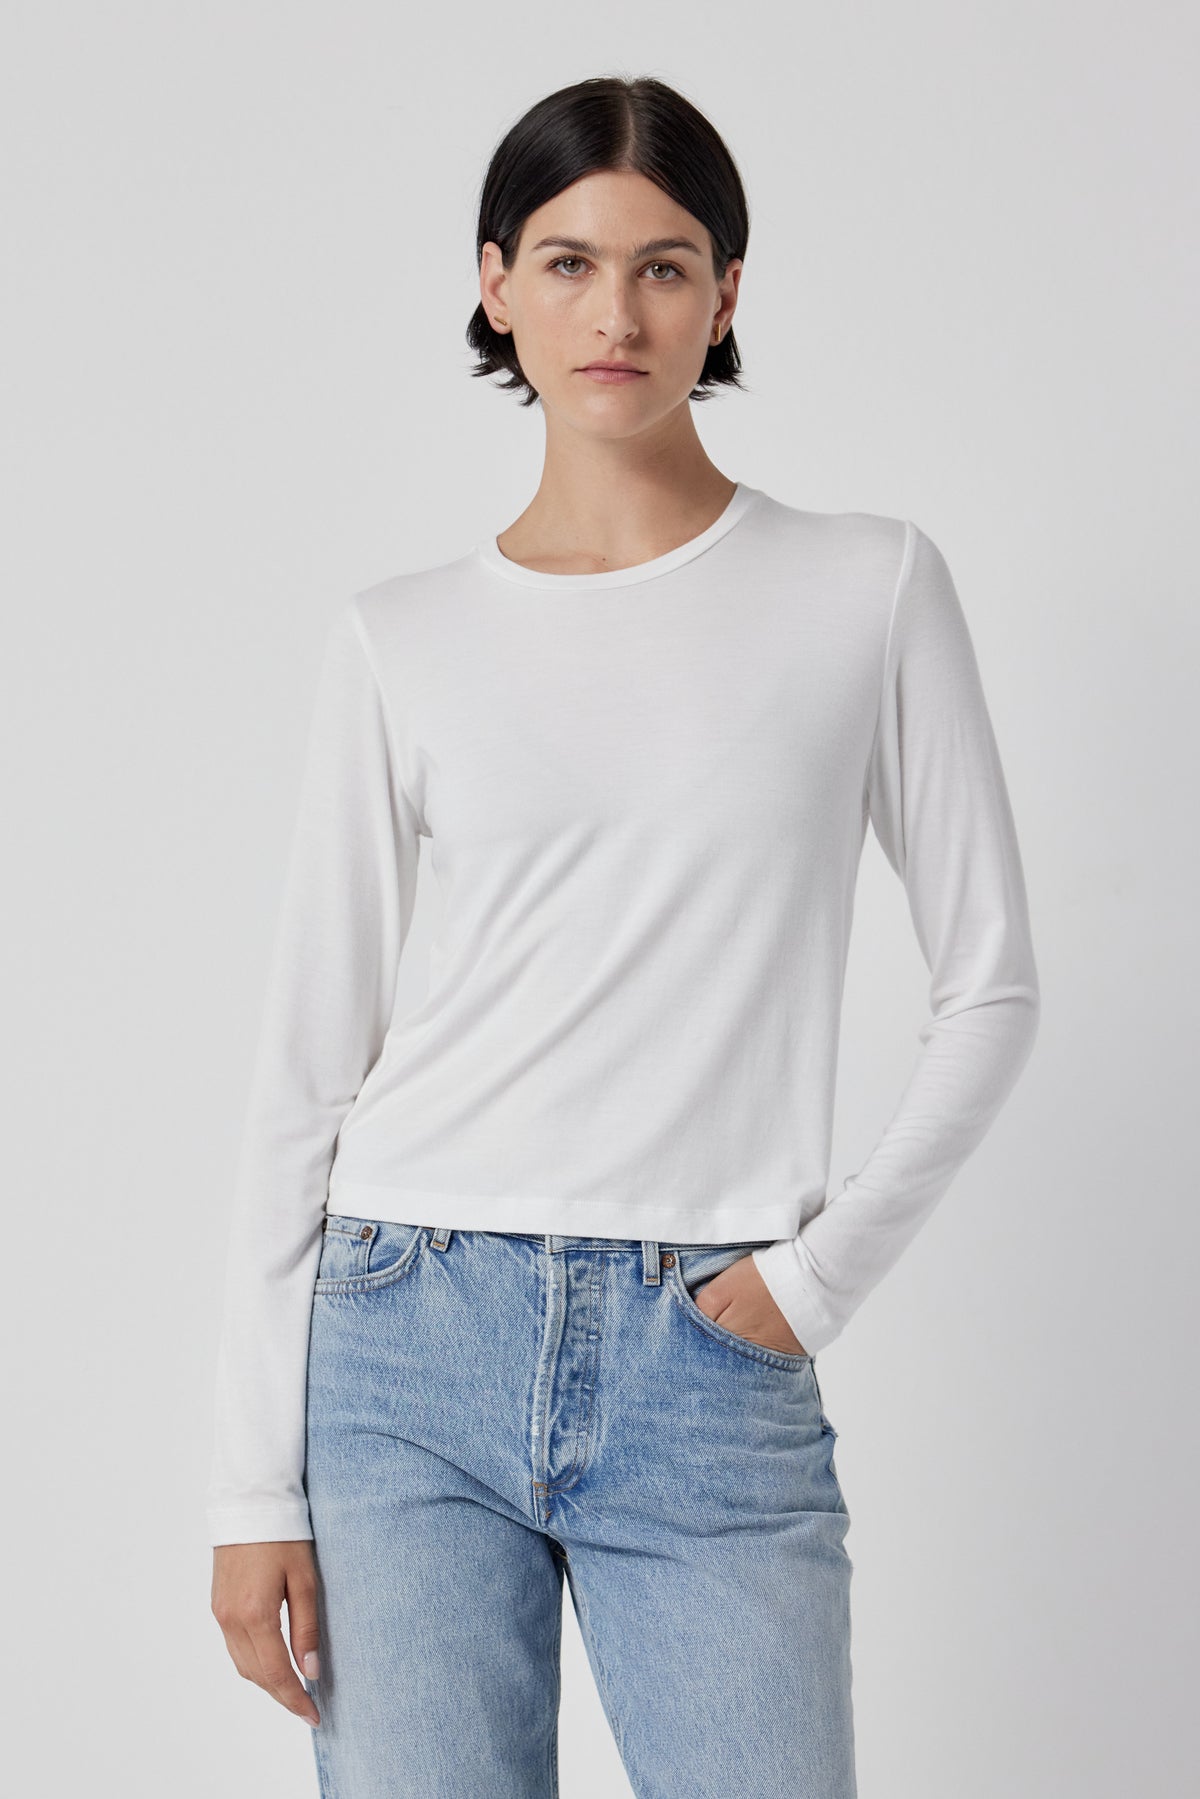 Slimmer fit, white long sleeve PACIFICA TEE with rib knit, by Velvet by Jenny Graham.-35416710611137